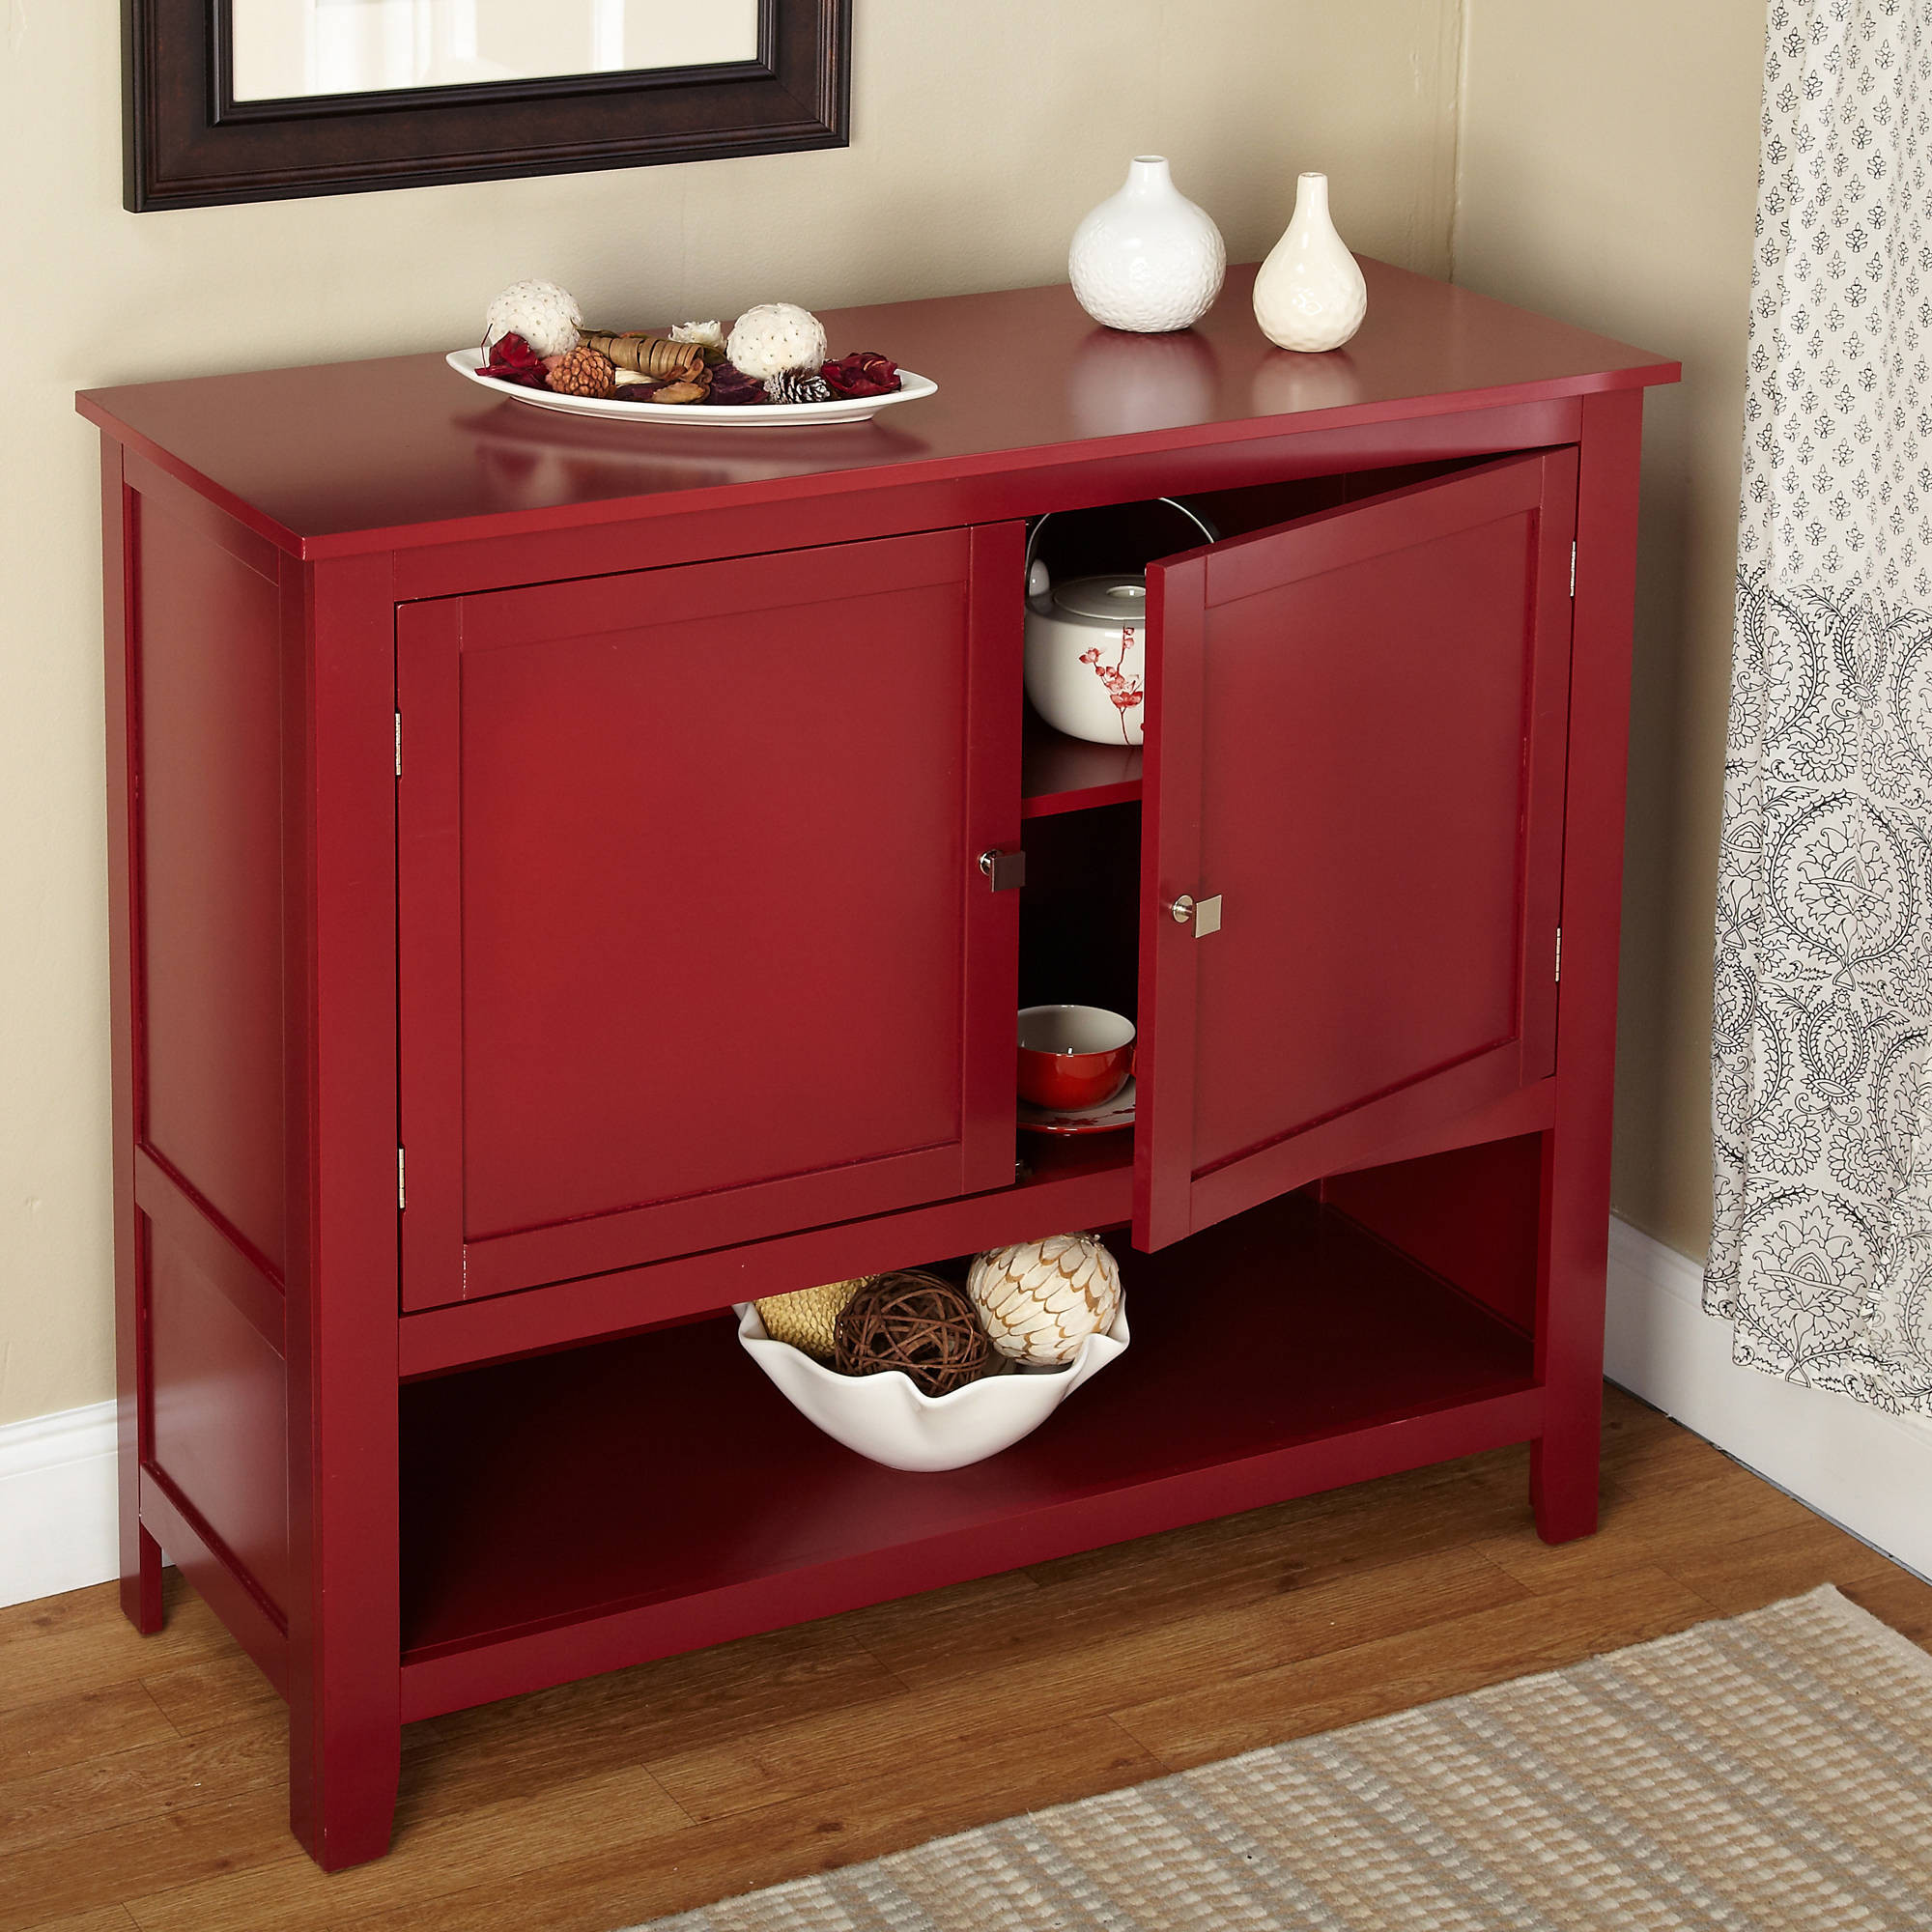 Small Kitchen Buffet Cabinet
 Red Buffet Cabinet Kitchen Storage Shelf with Doors Table